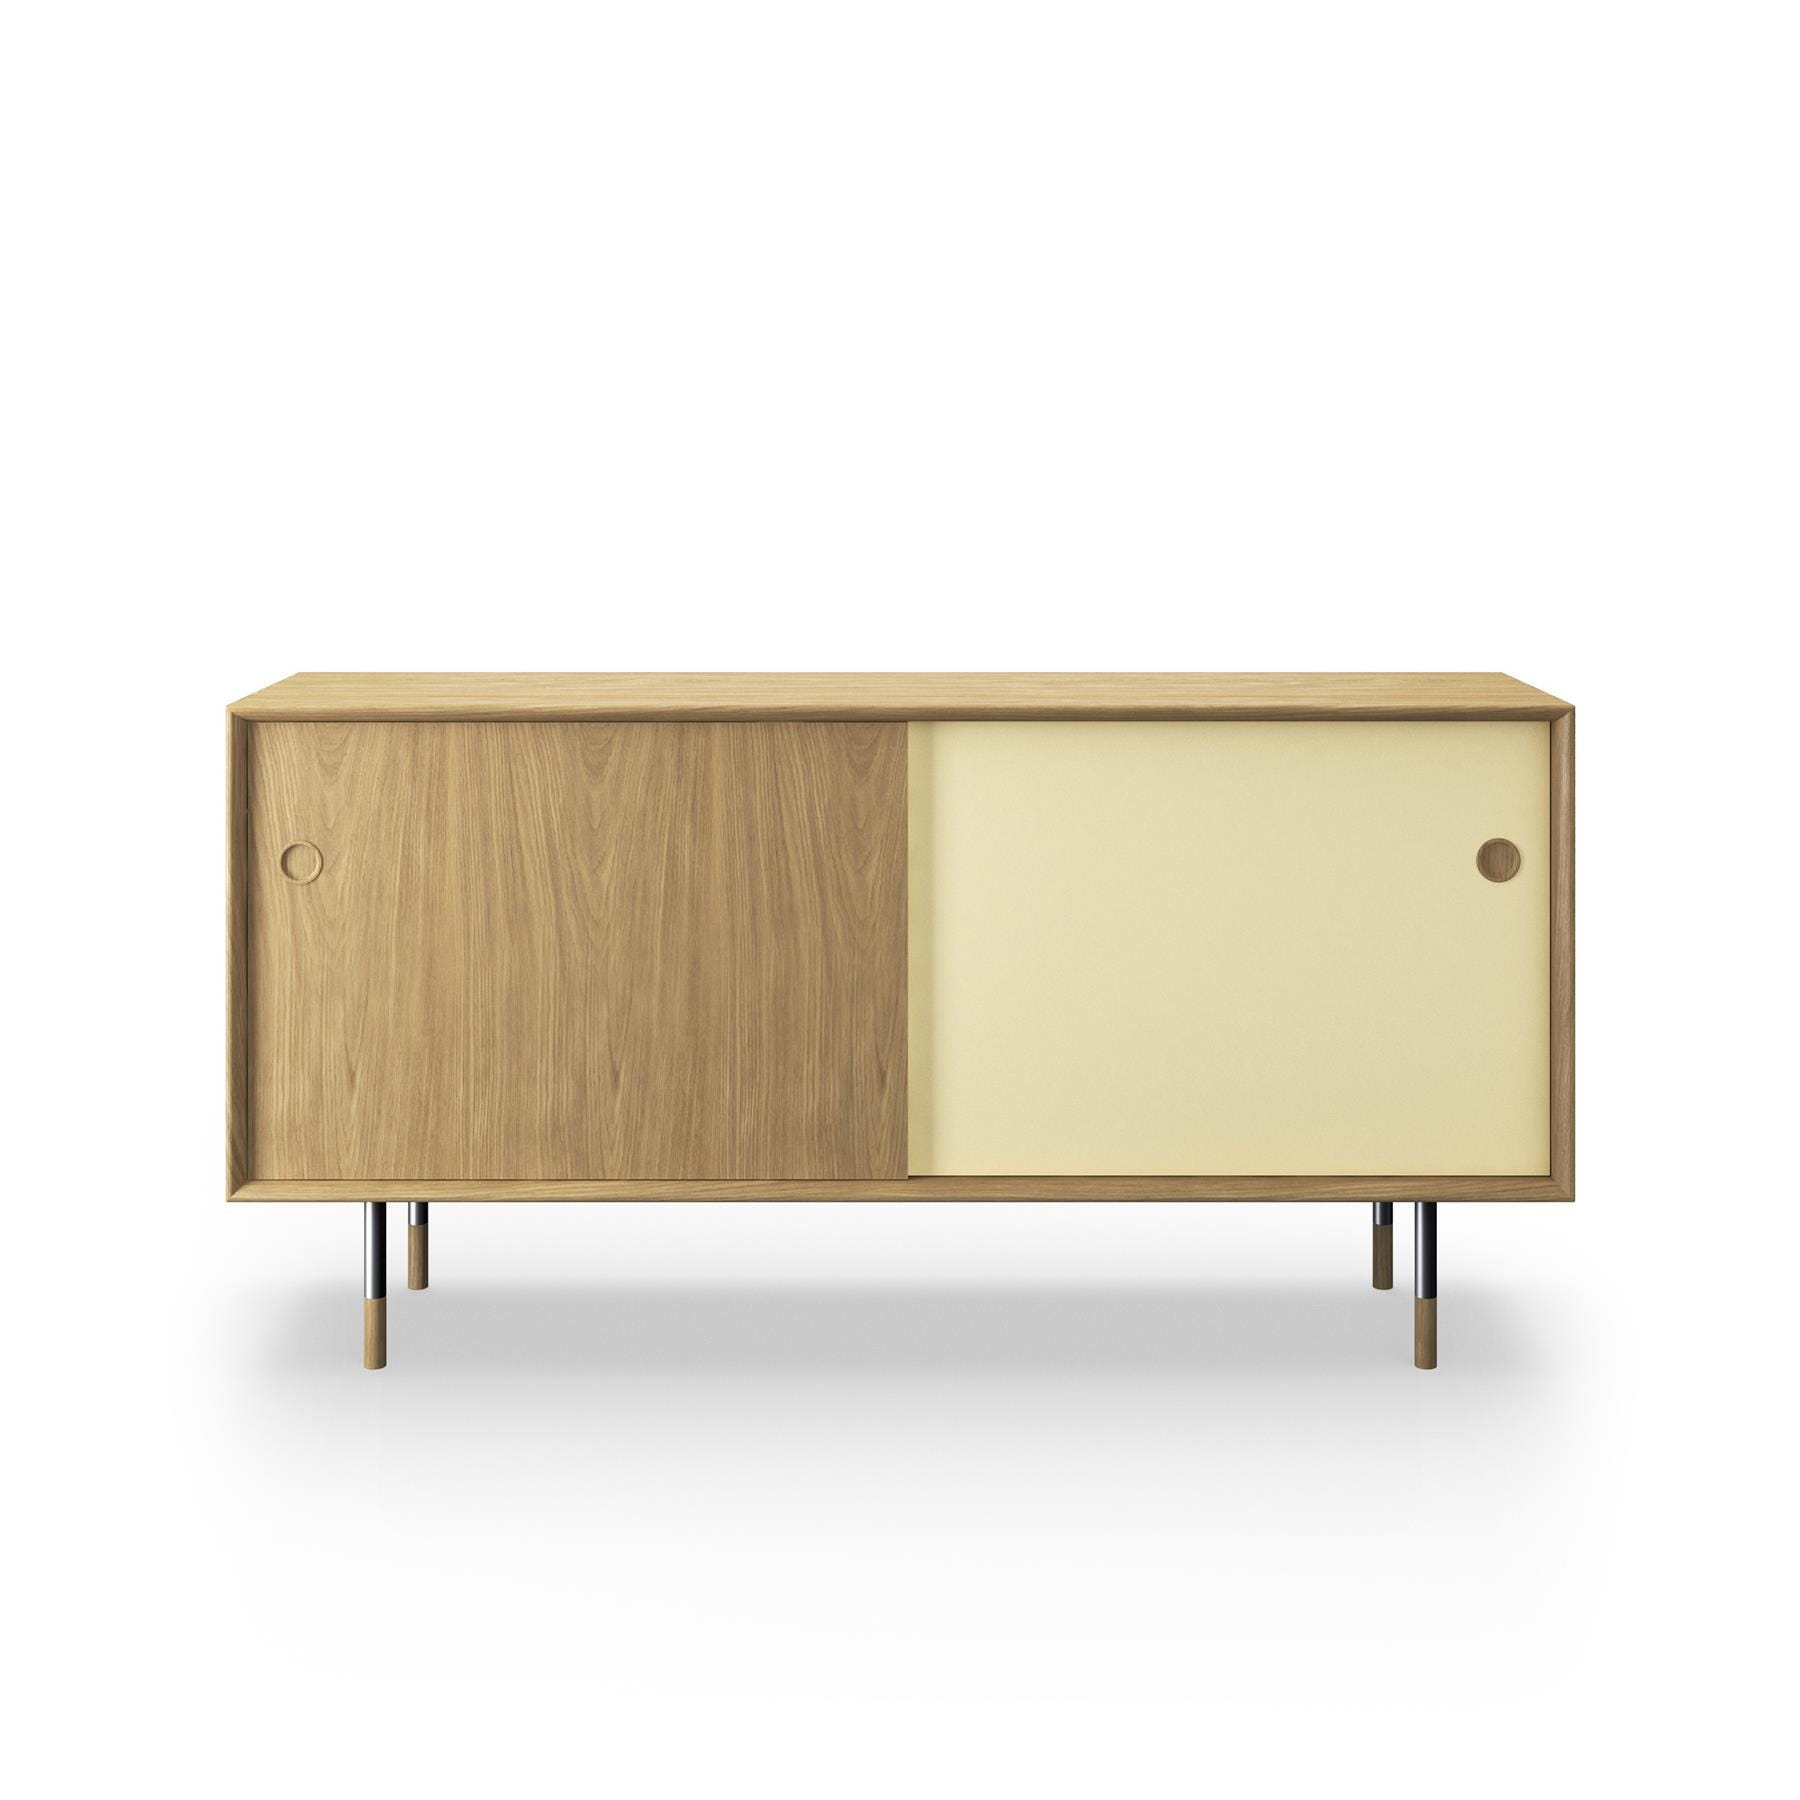 Sibast No 11 Sideboard White Oiled Oak Yellow And Natural Front Metal Legs Light Wood Designer Furniture From Holloways Of Ludlow